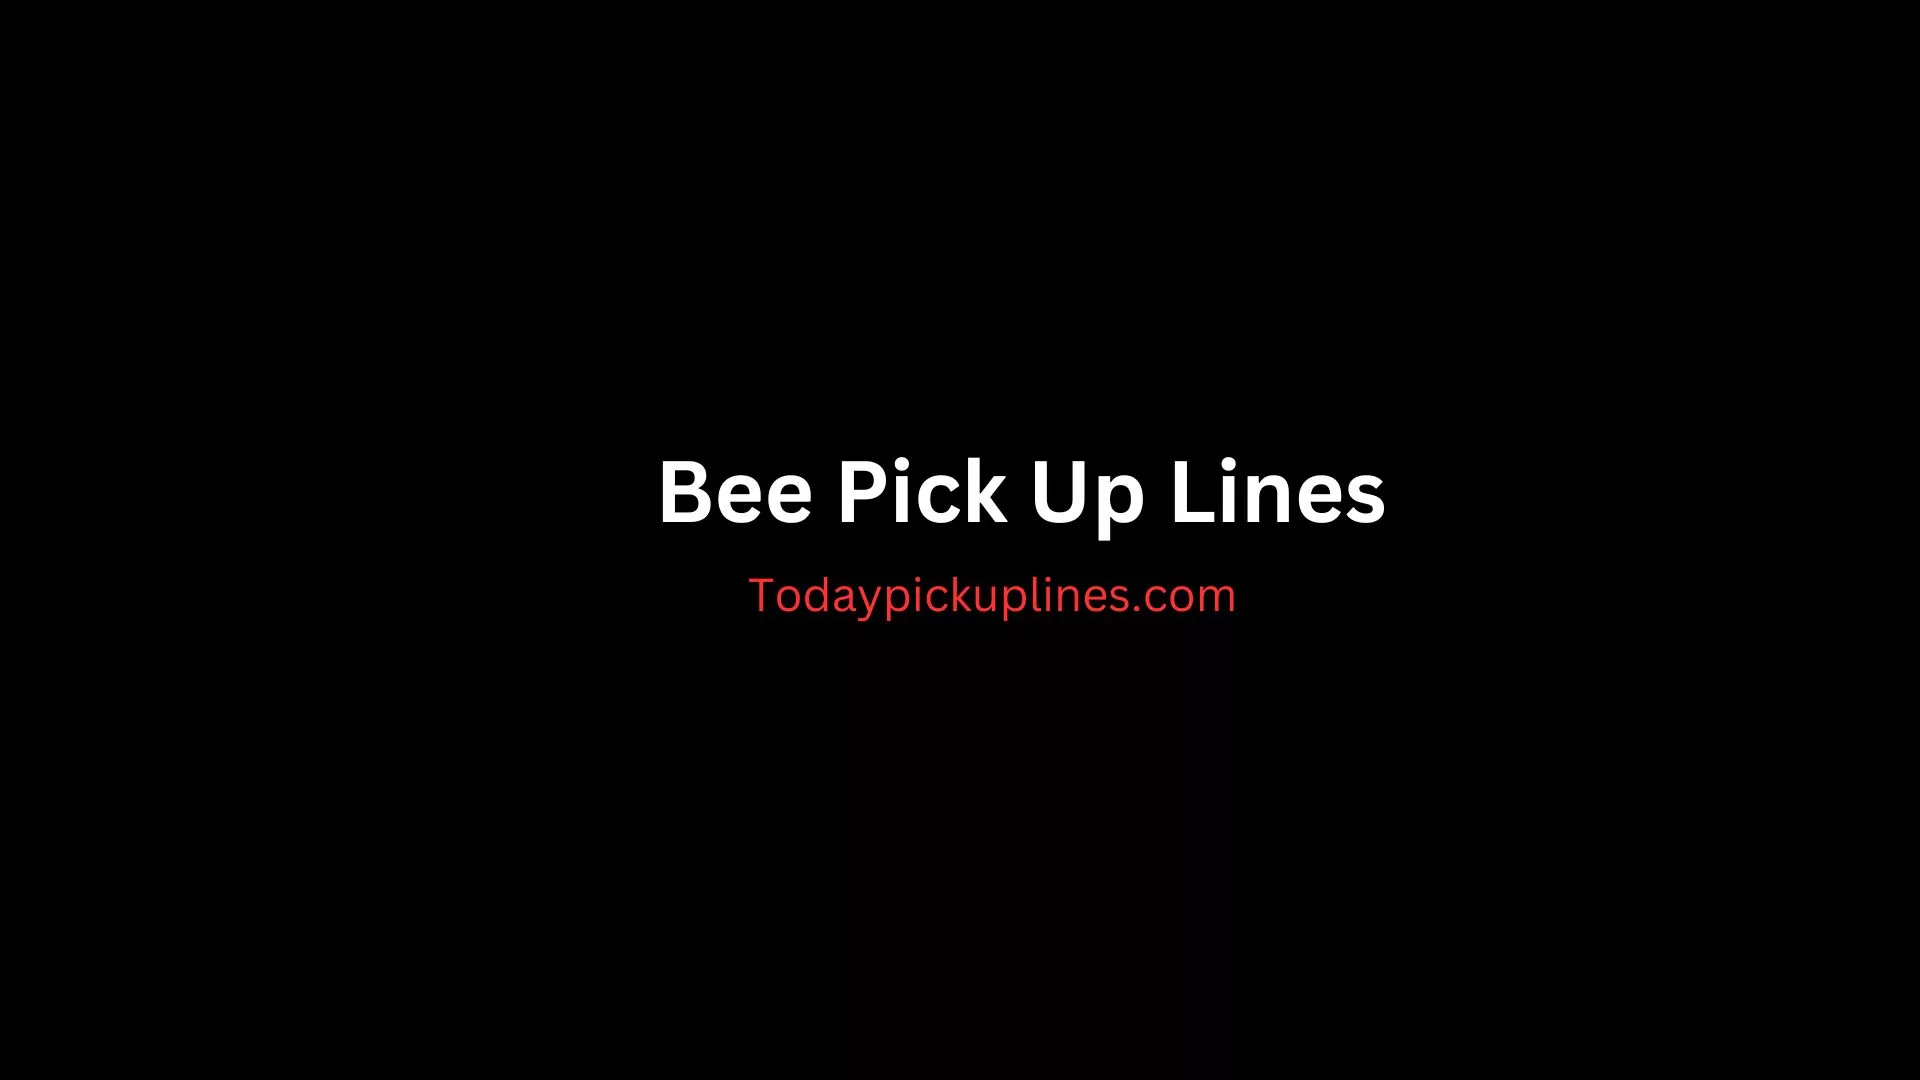 Bee Pick Up Lines